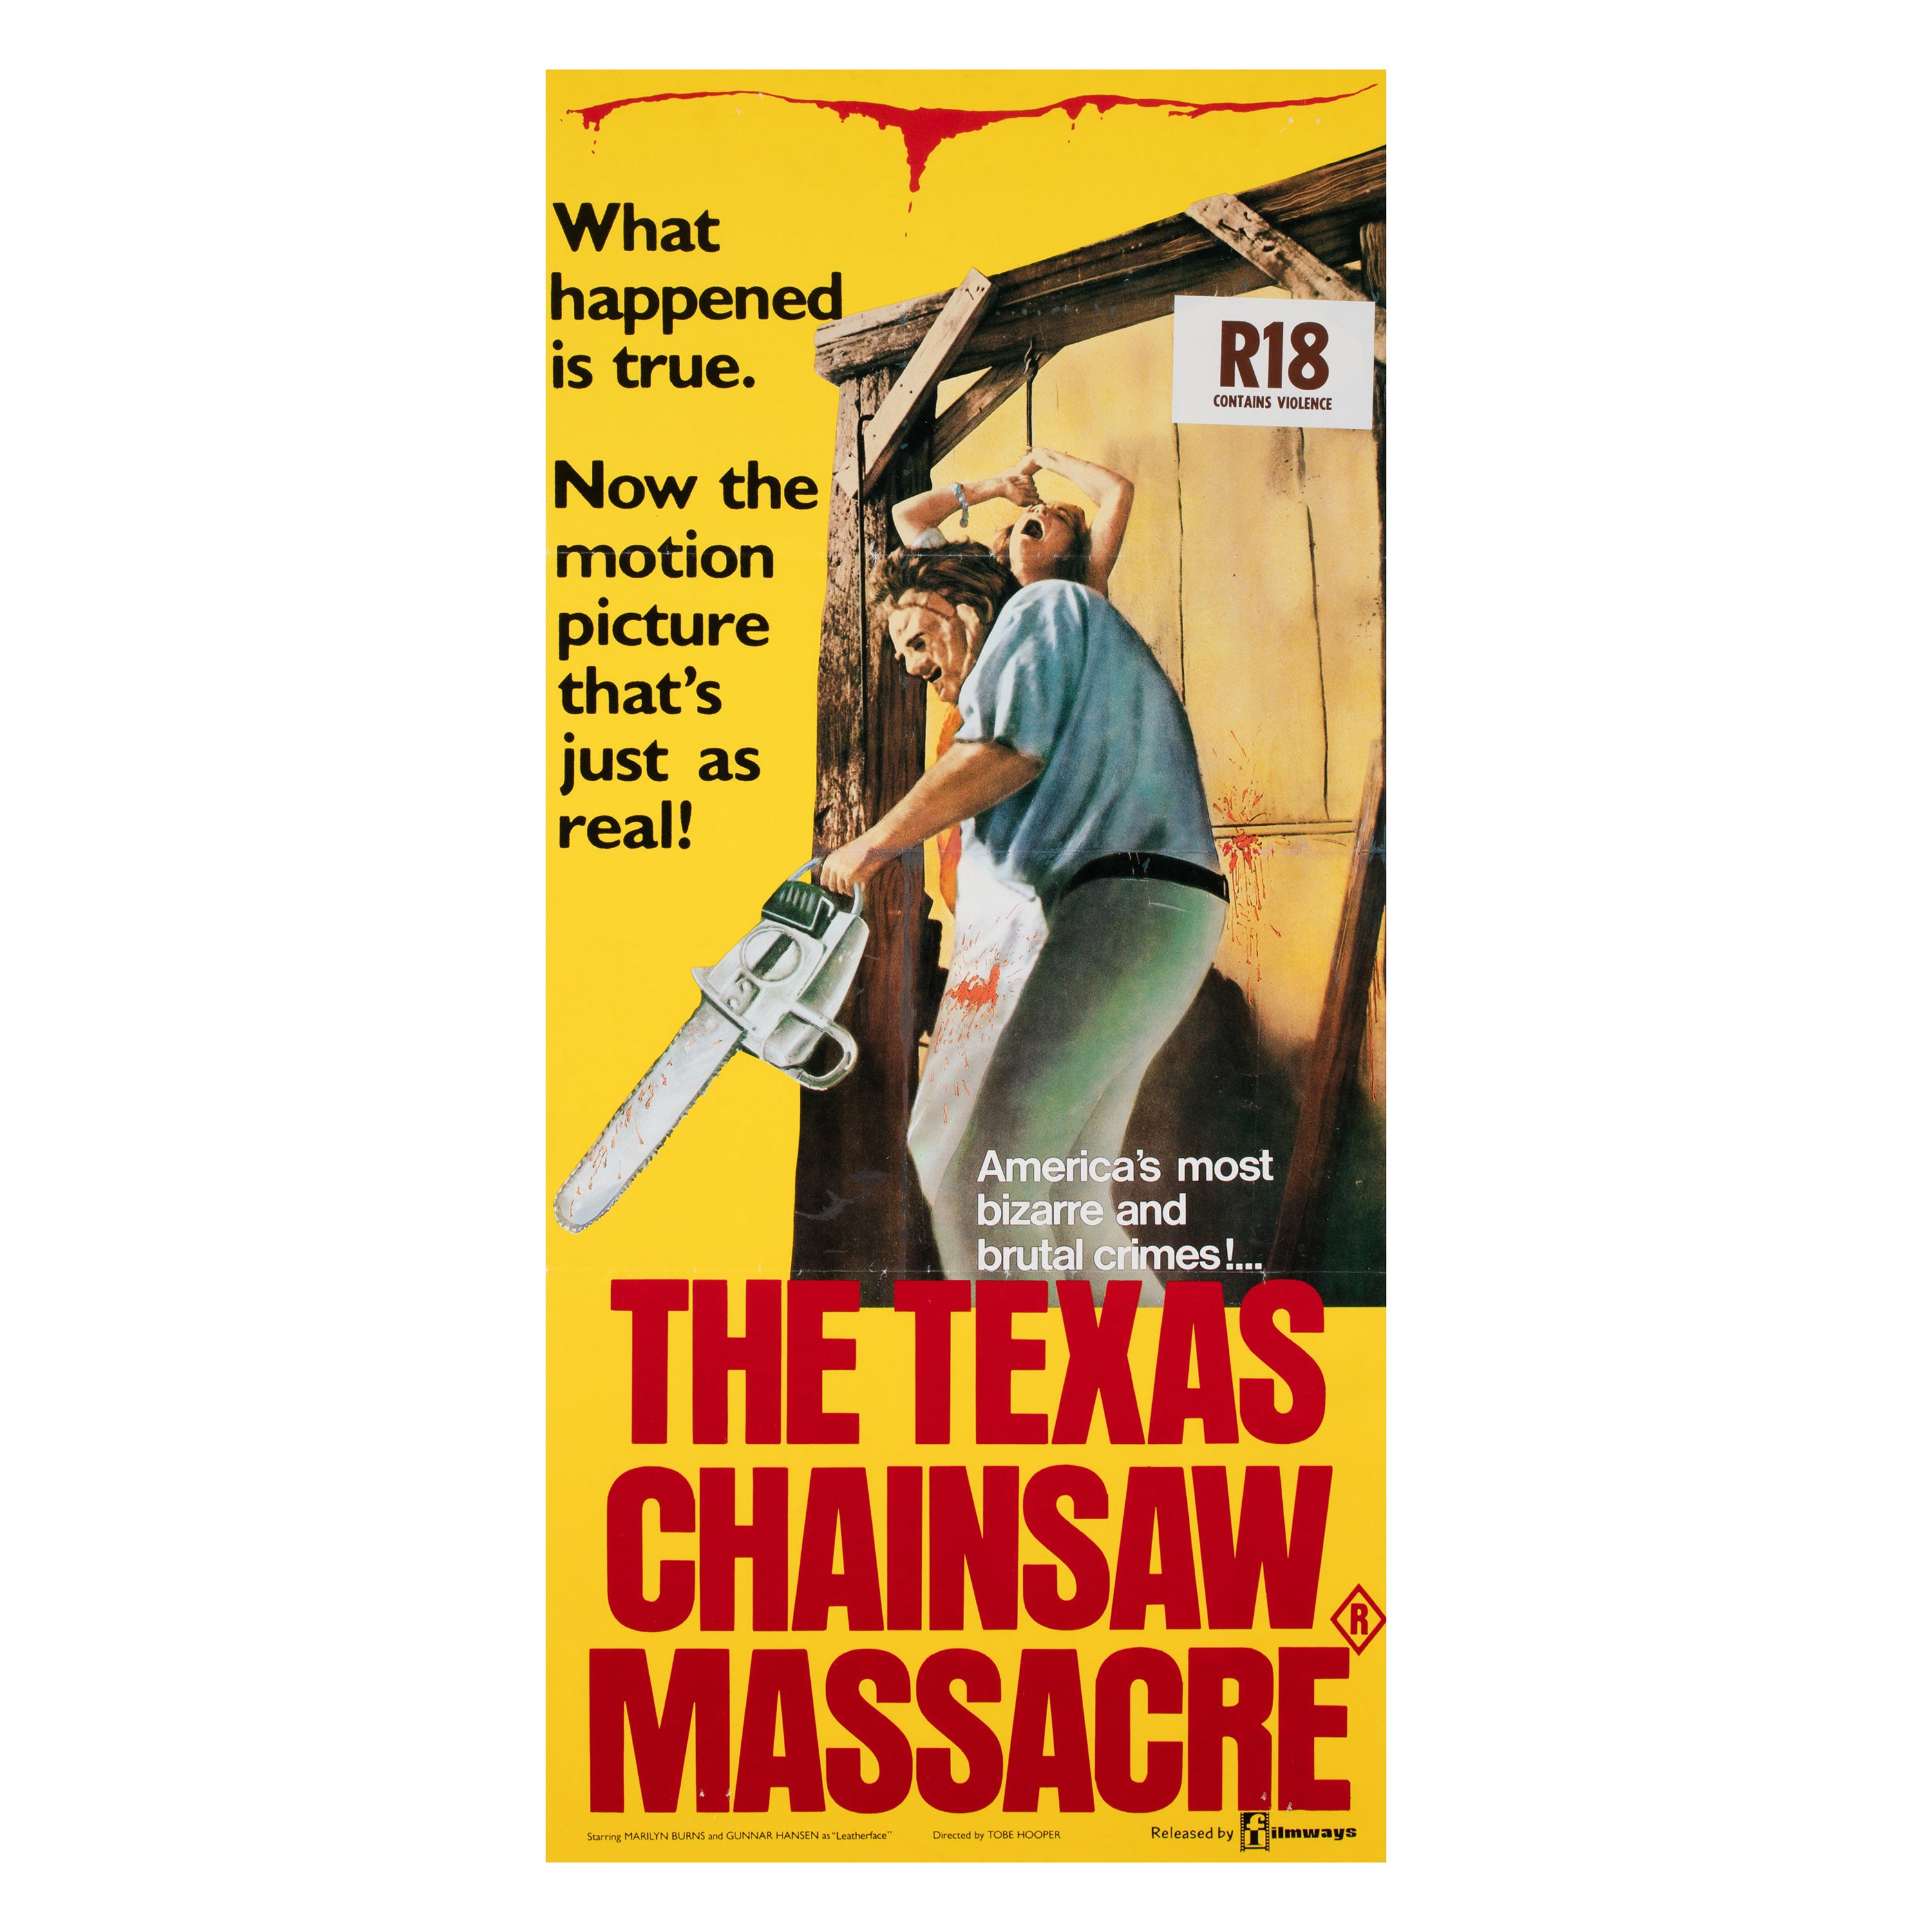 "THE TEXAS CHAINSAW MASSACRE", 1984 Australian Daybill Film Movie Poster For Sale